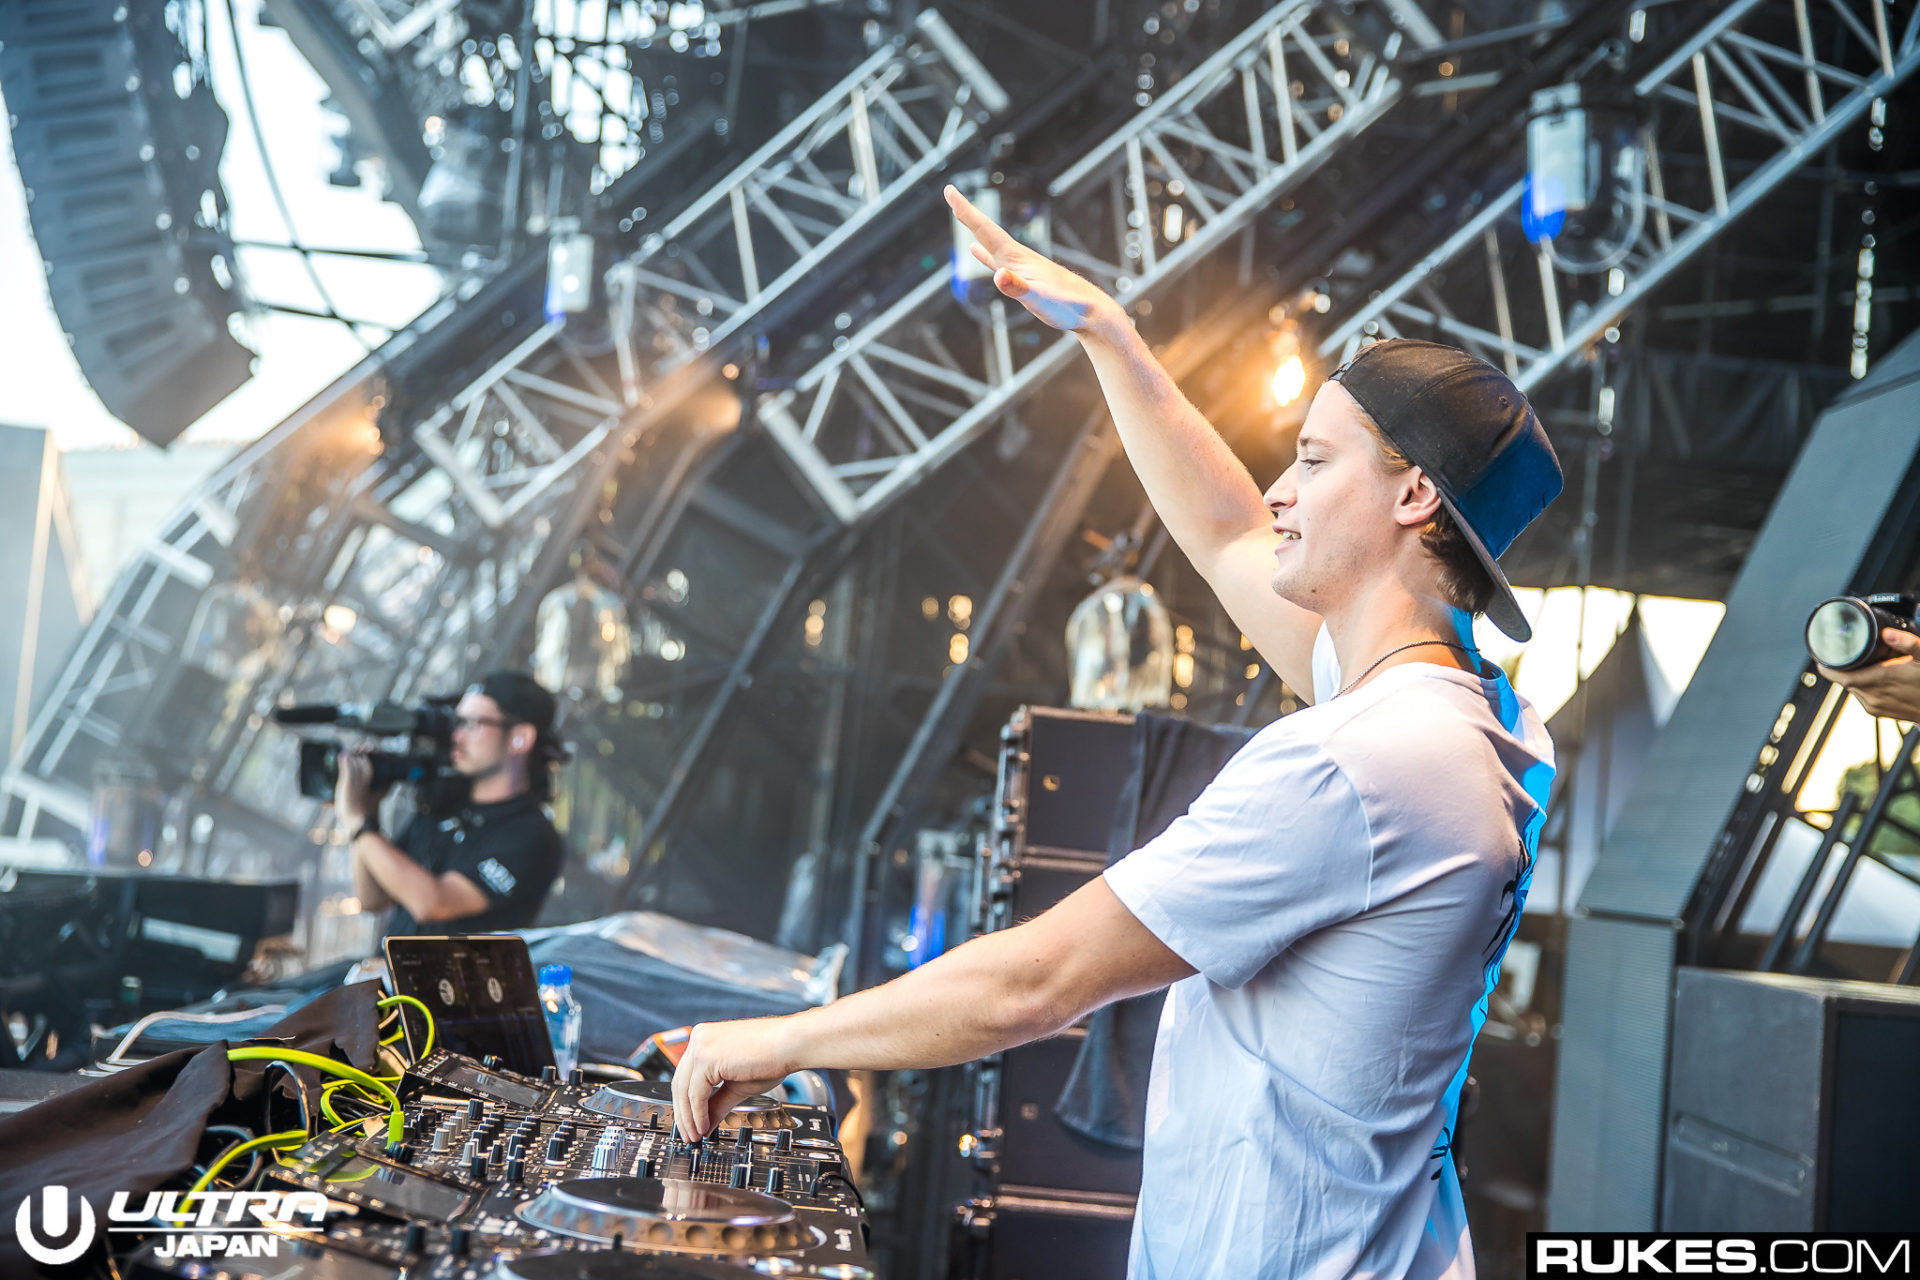 Kygo Brings the World a 'Higher Love' With New Album ‘Golden Hour’